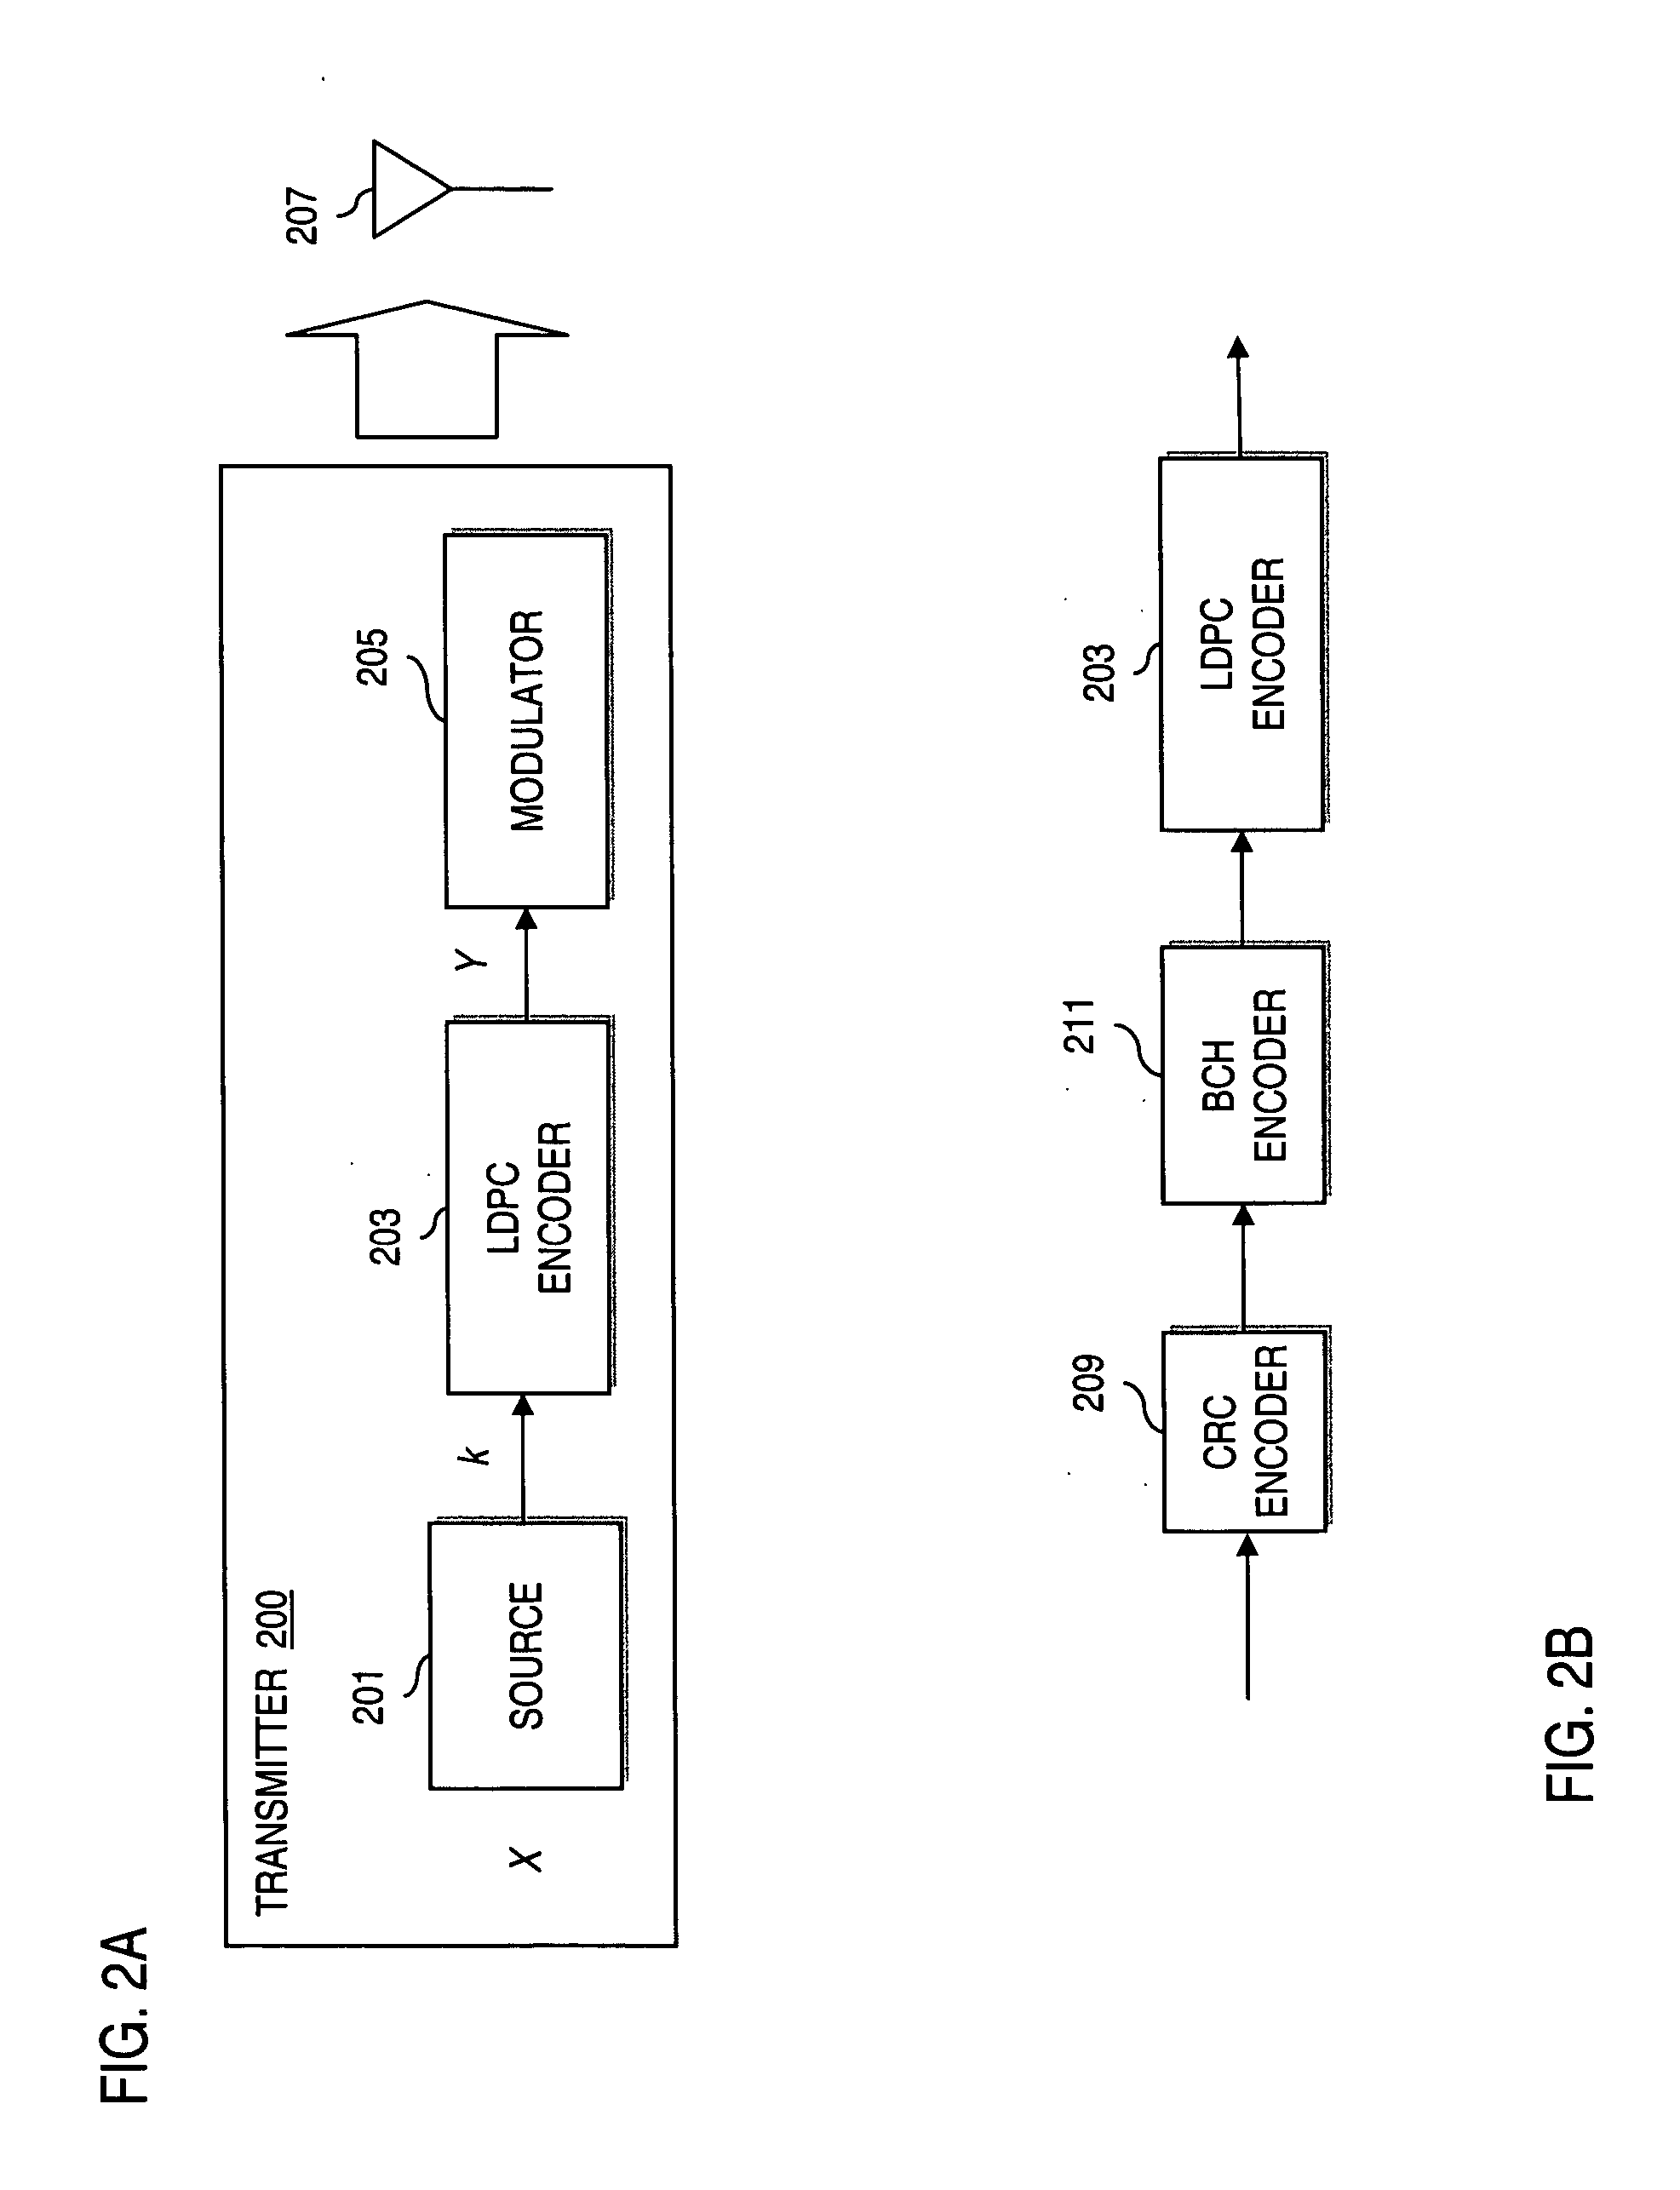 Method and system for providing short block length low density parity check (LDPC) codes in support of broadband satellite applications